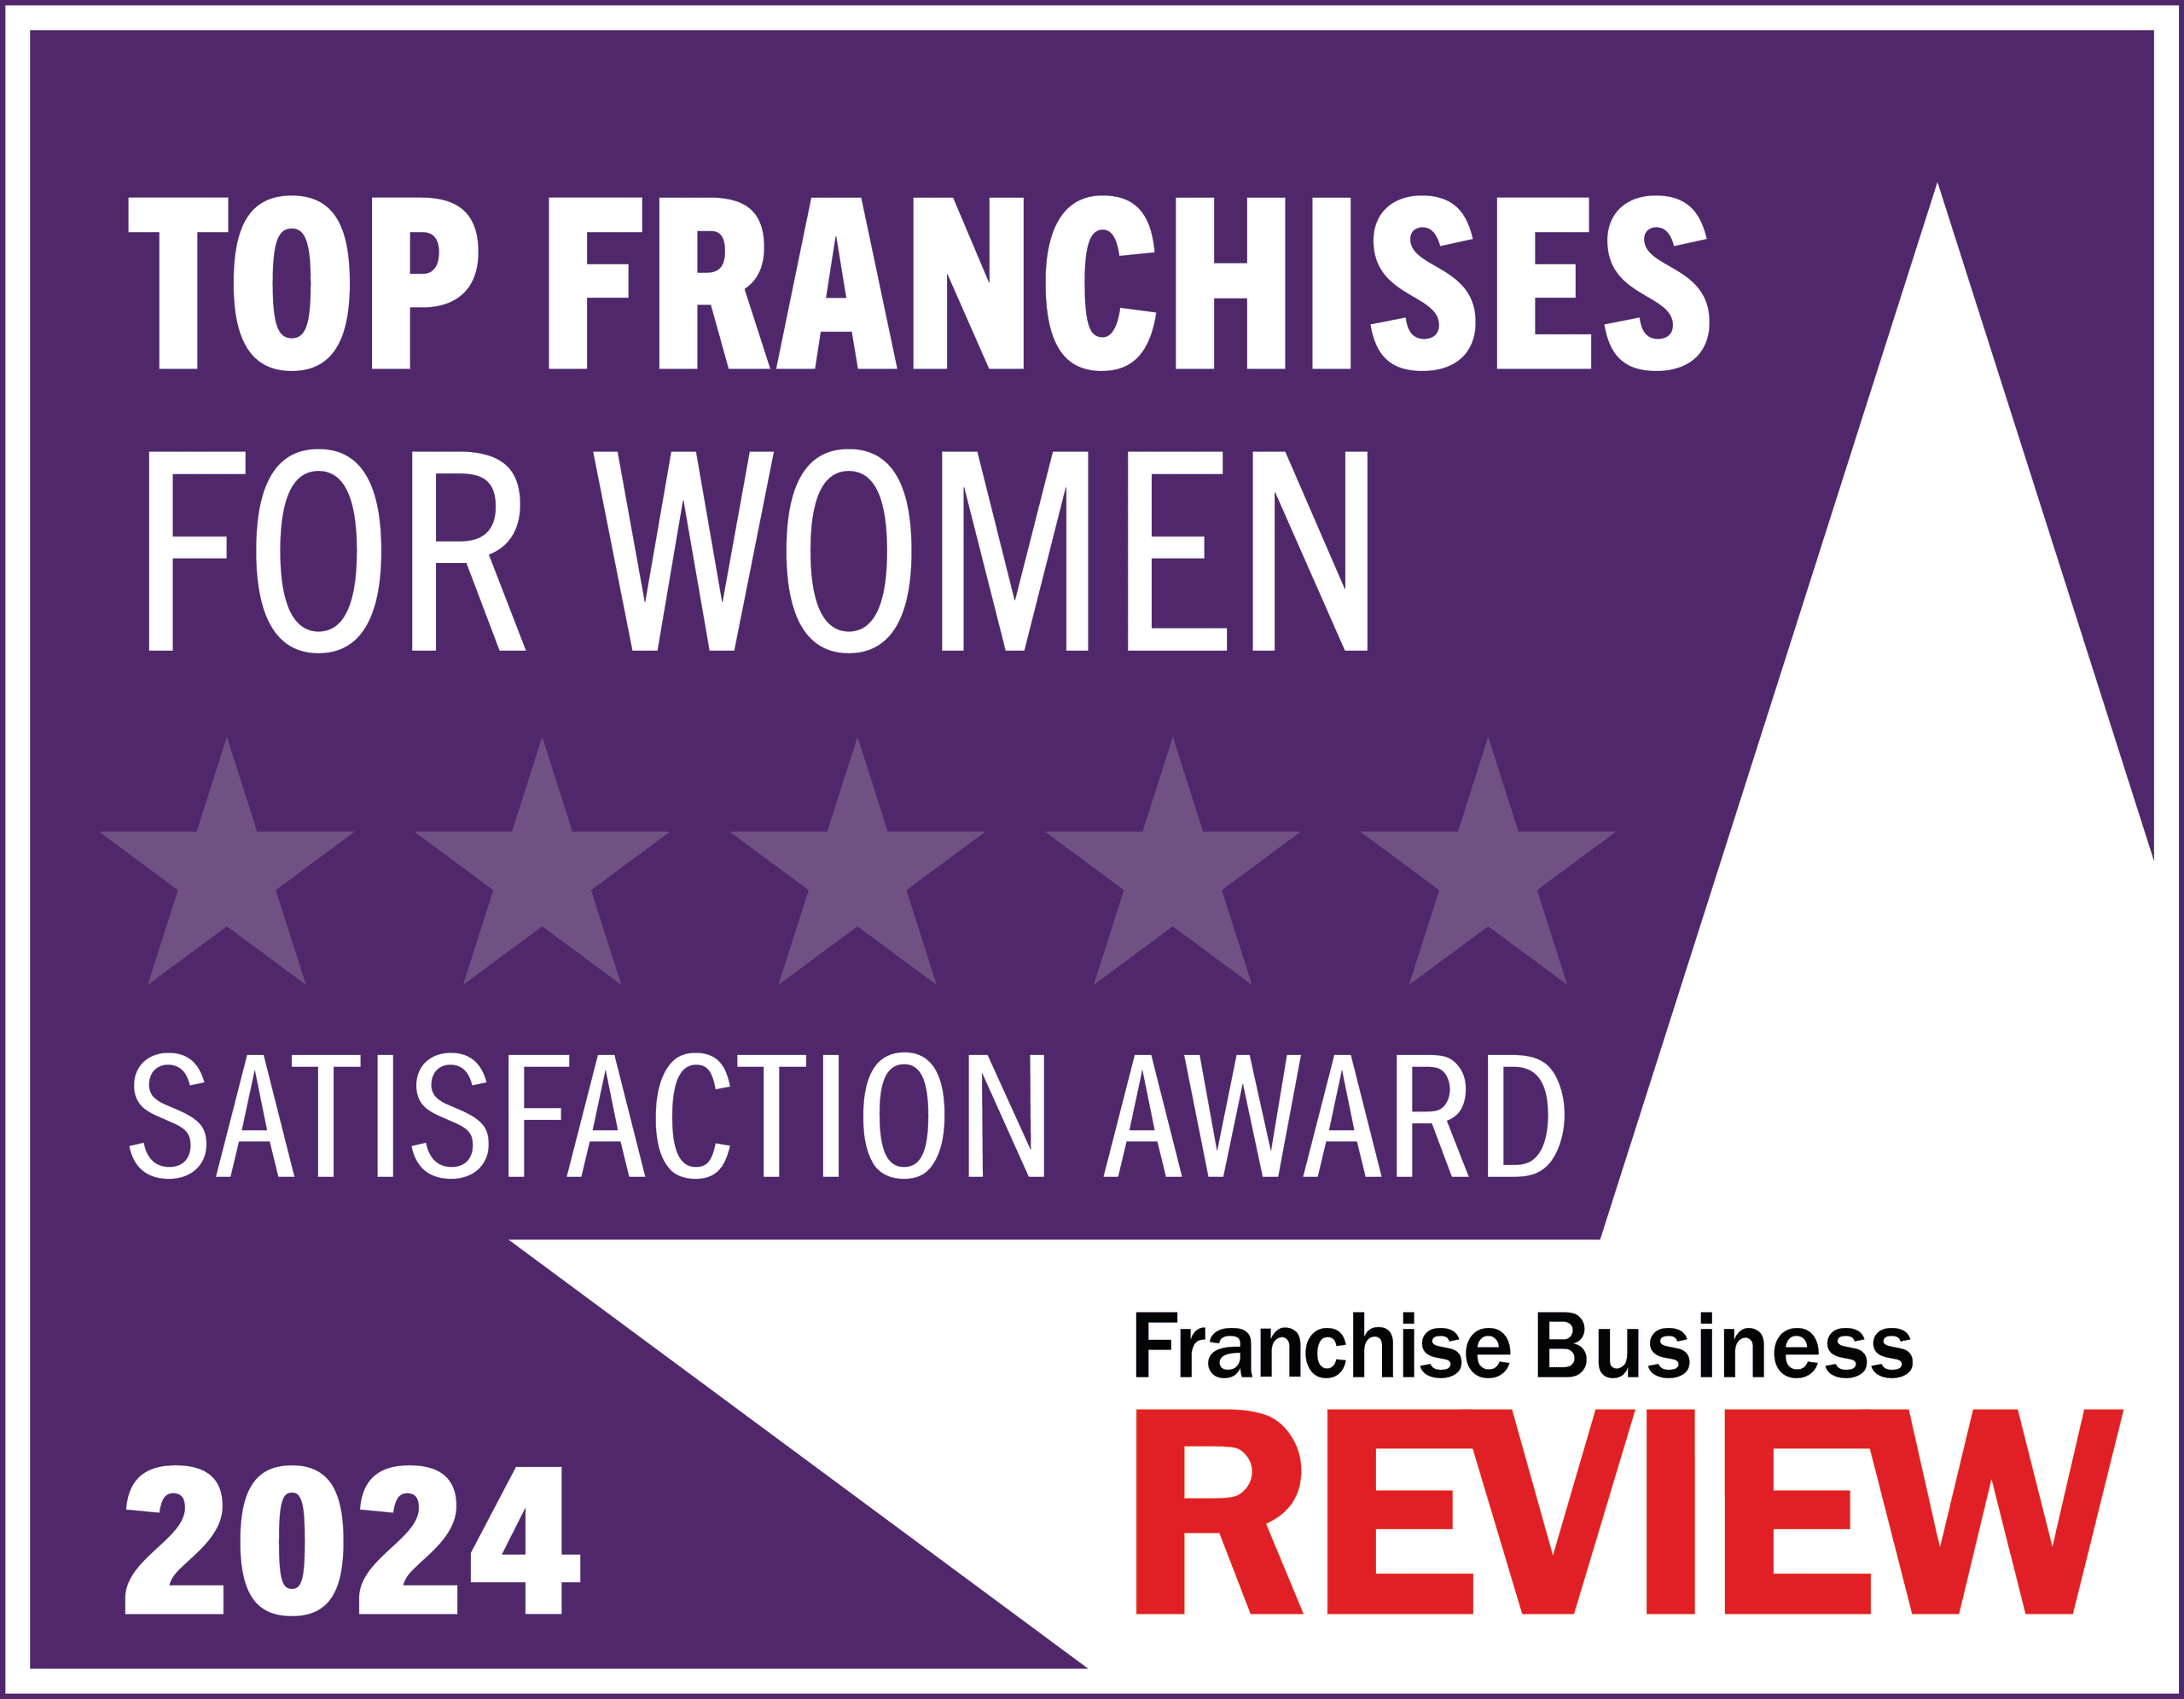 Franchise Business Review Top Franchises for Women - 2024